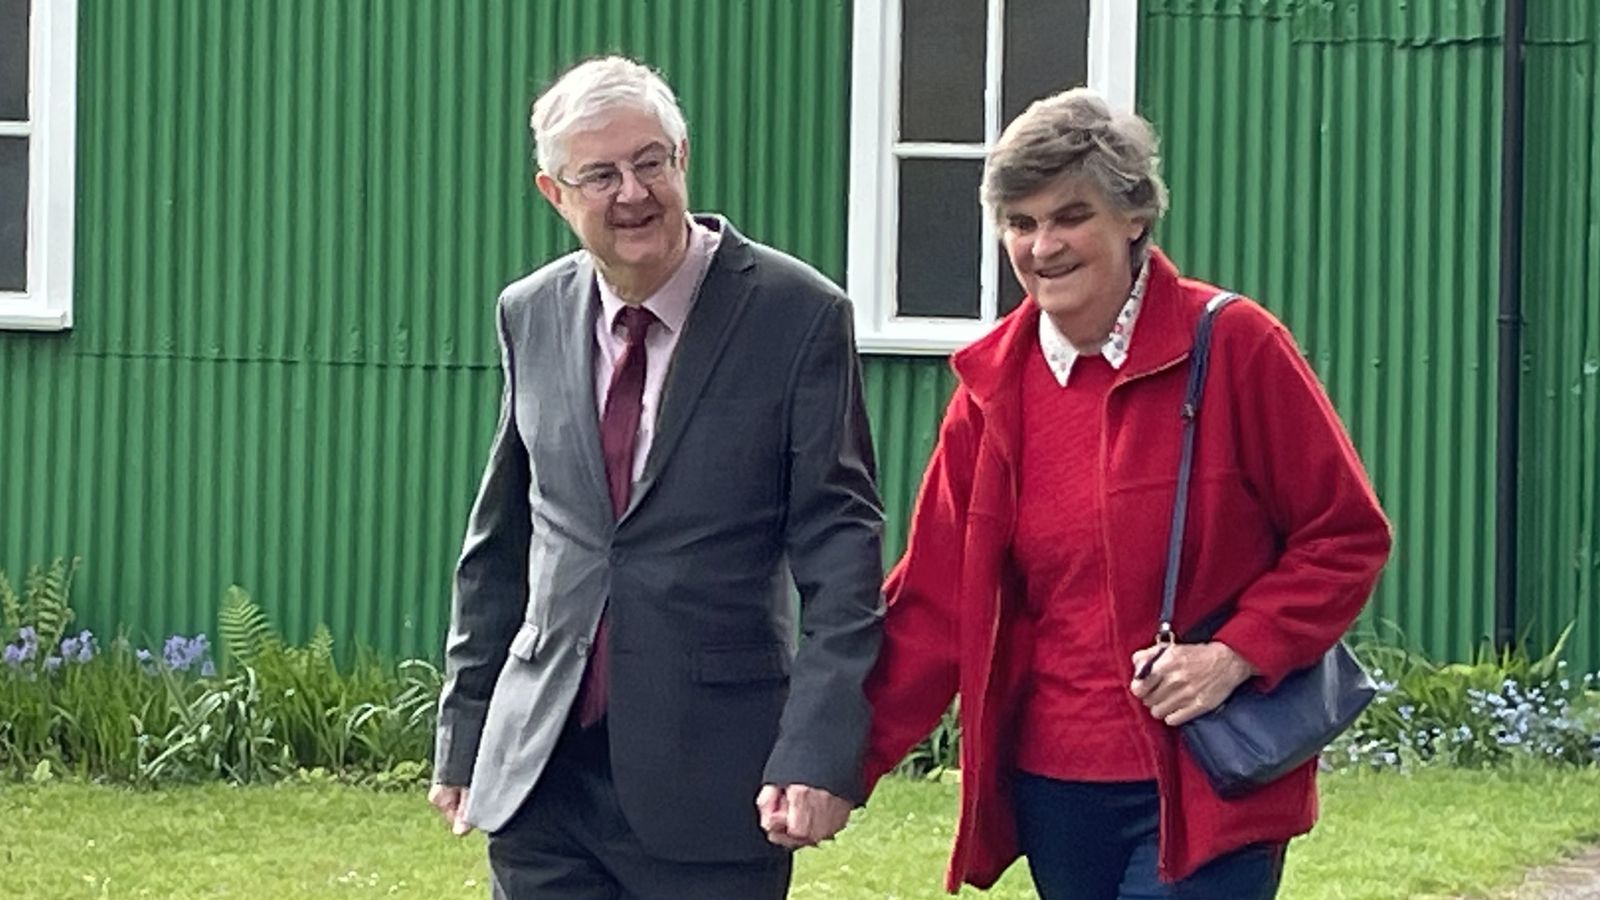 Wales First Minister Mark Drakeford’s wife, Clare, dies